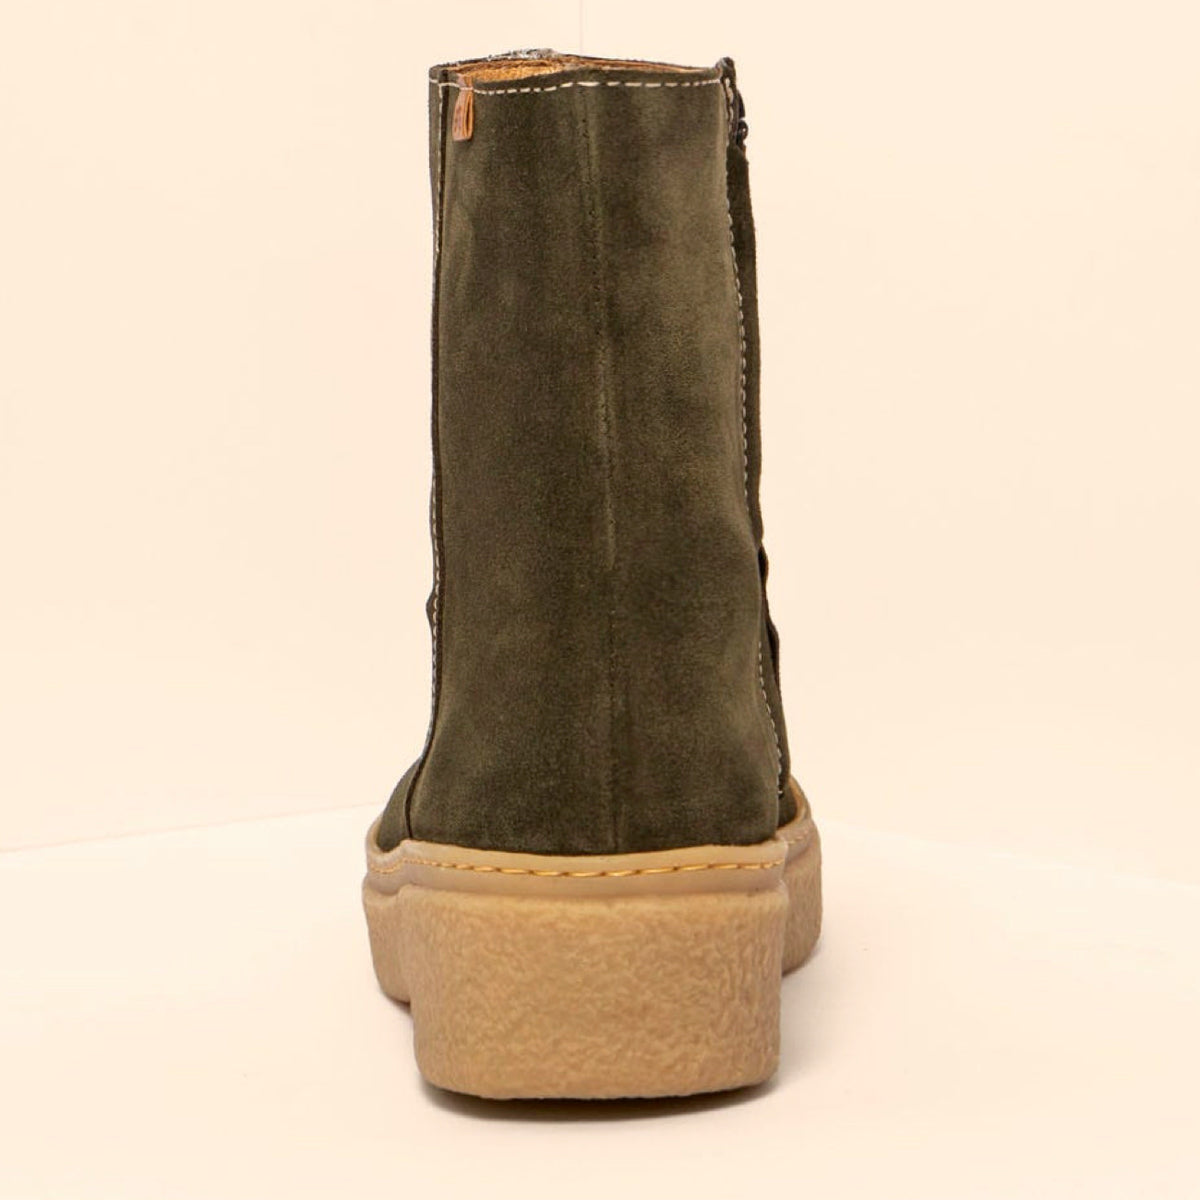 El Naturalista ARPEA Boot Silk Suede Leather, Forest